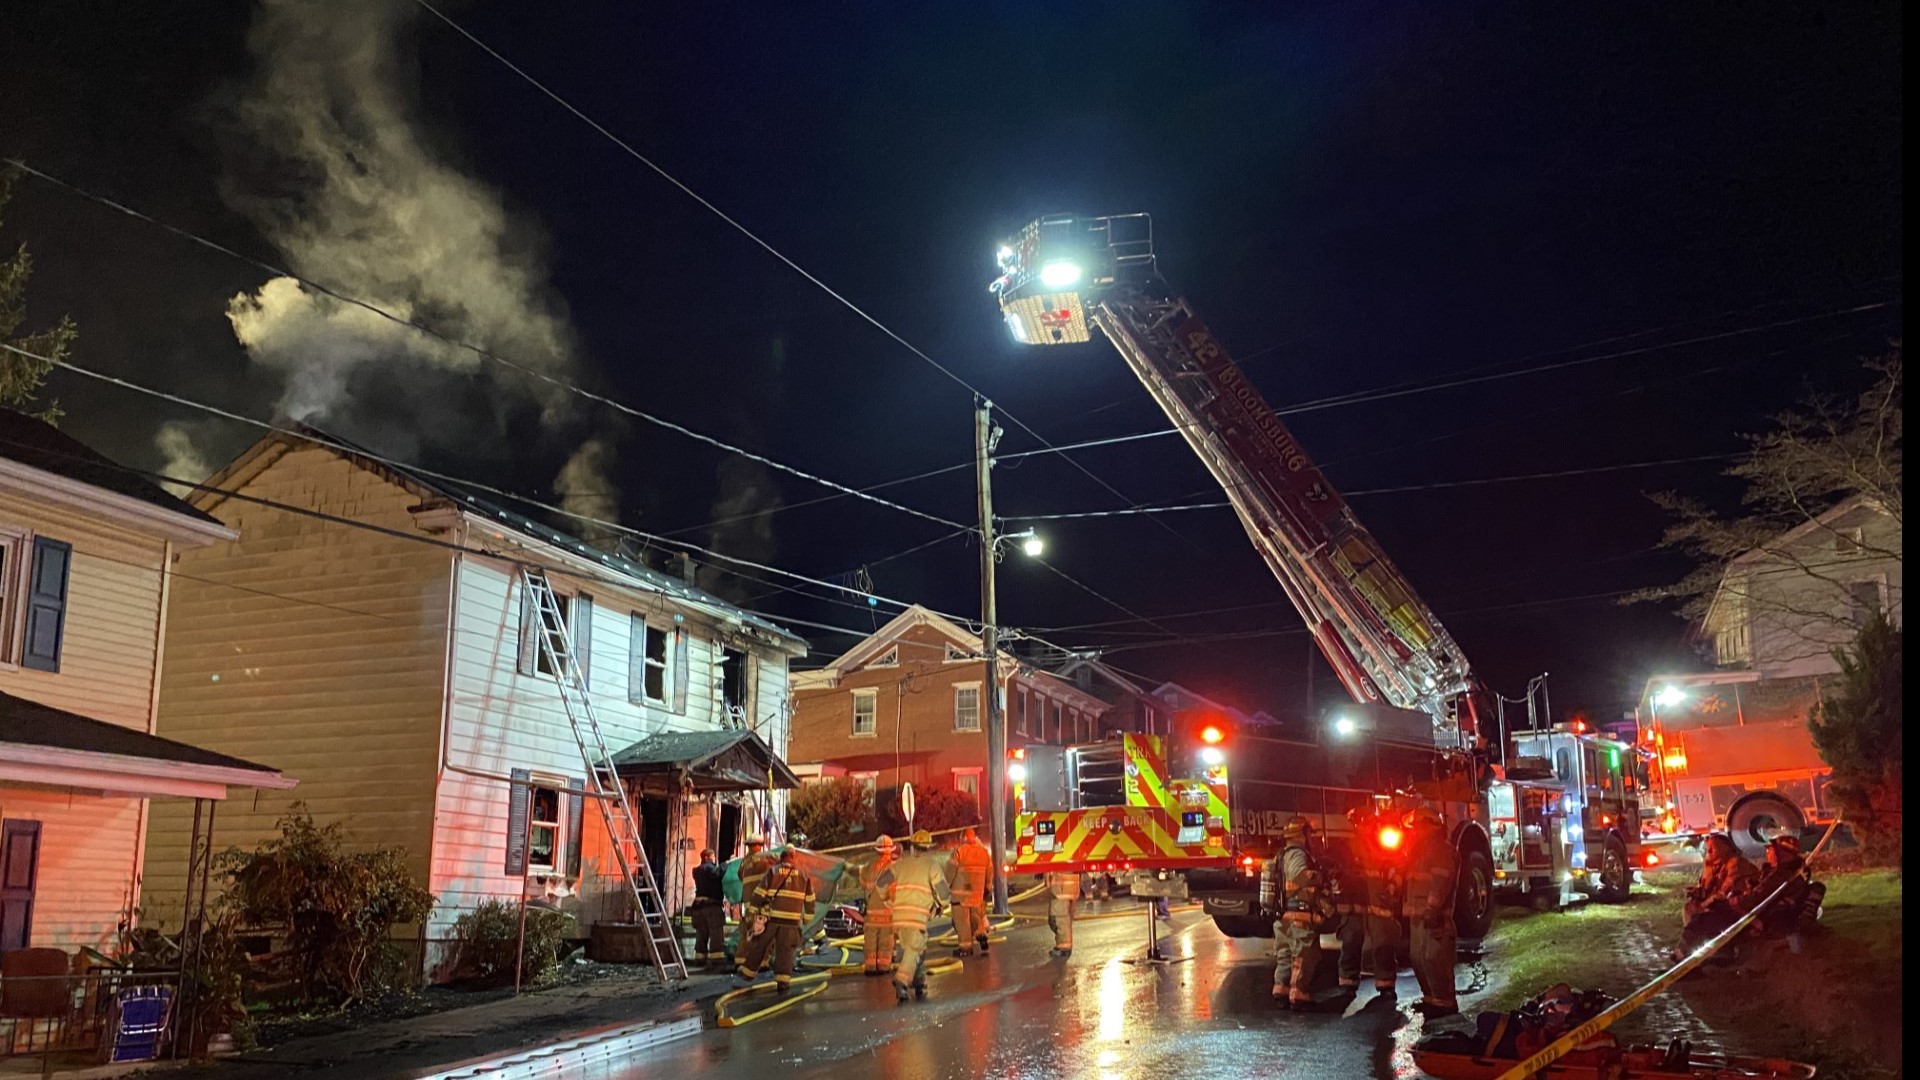 Crews from the borough and neighboring communities battled the blaze for hours.